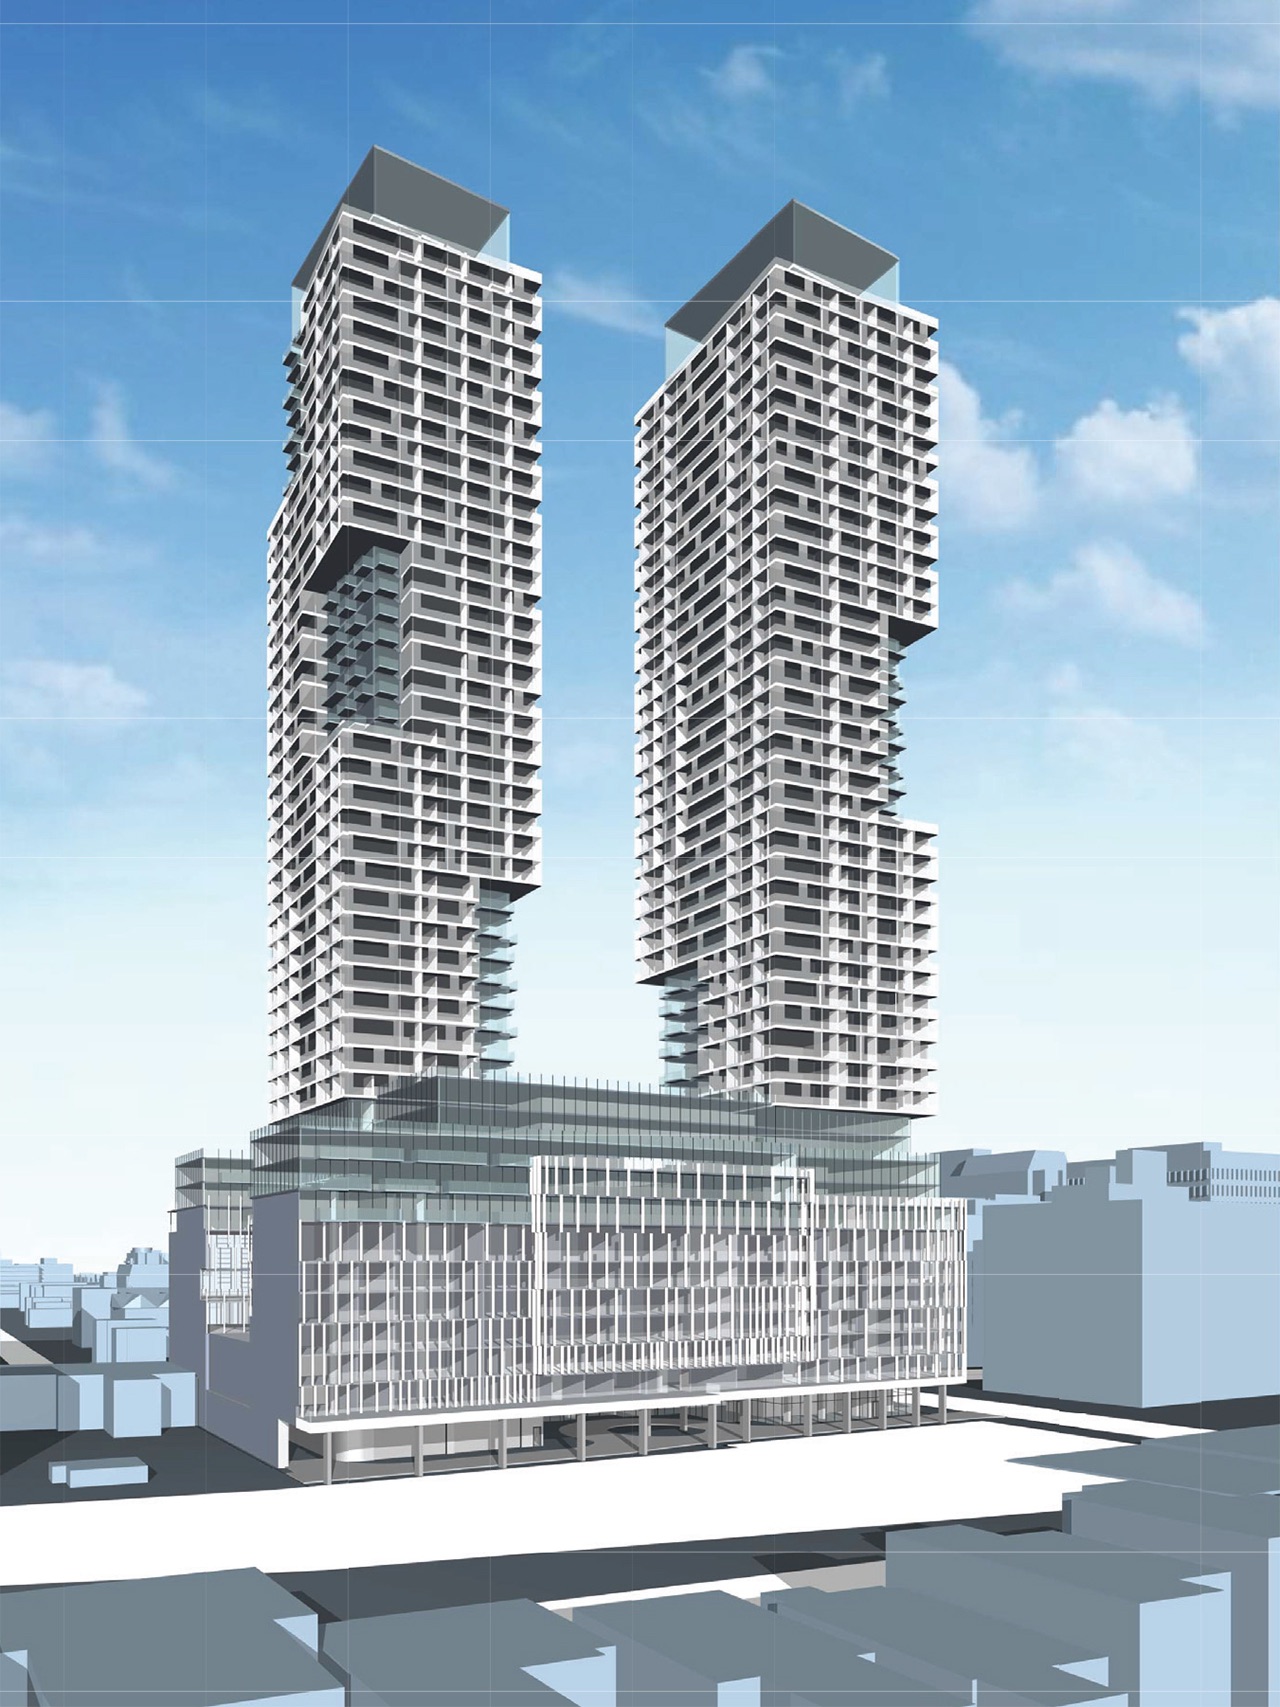 High Rise Development Application at 93A Avenue and 120 Street